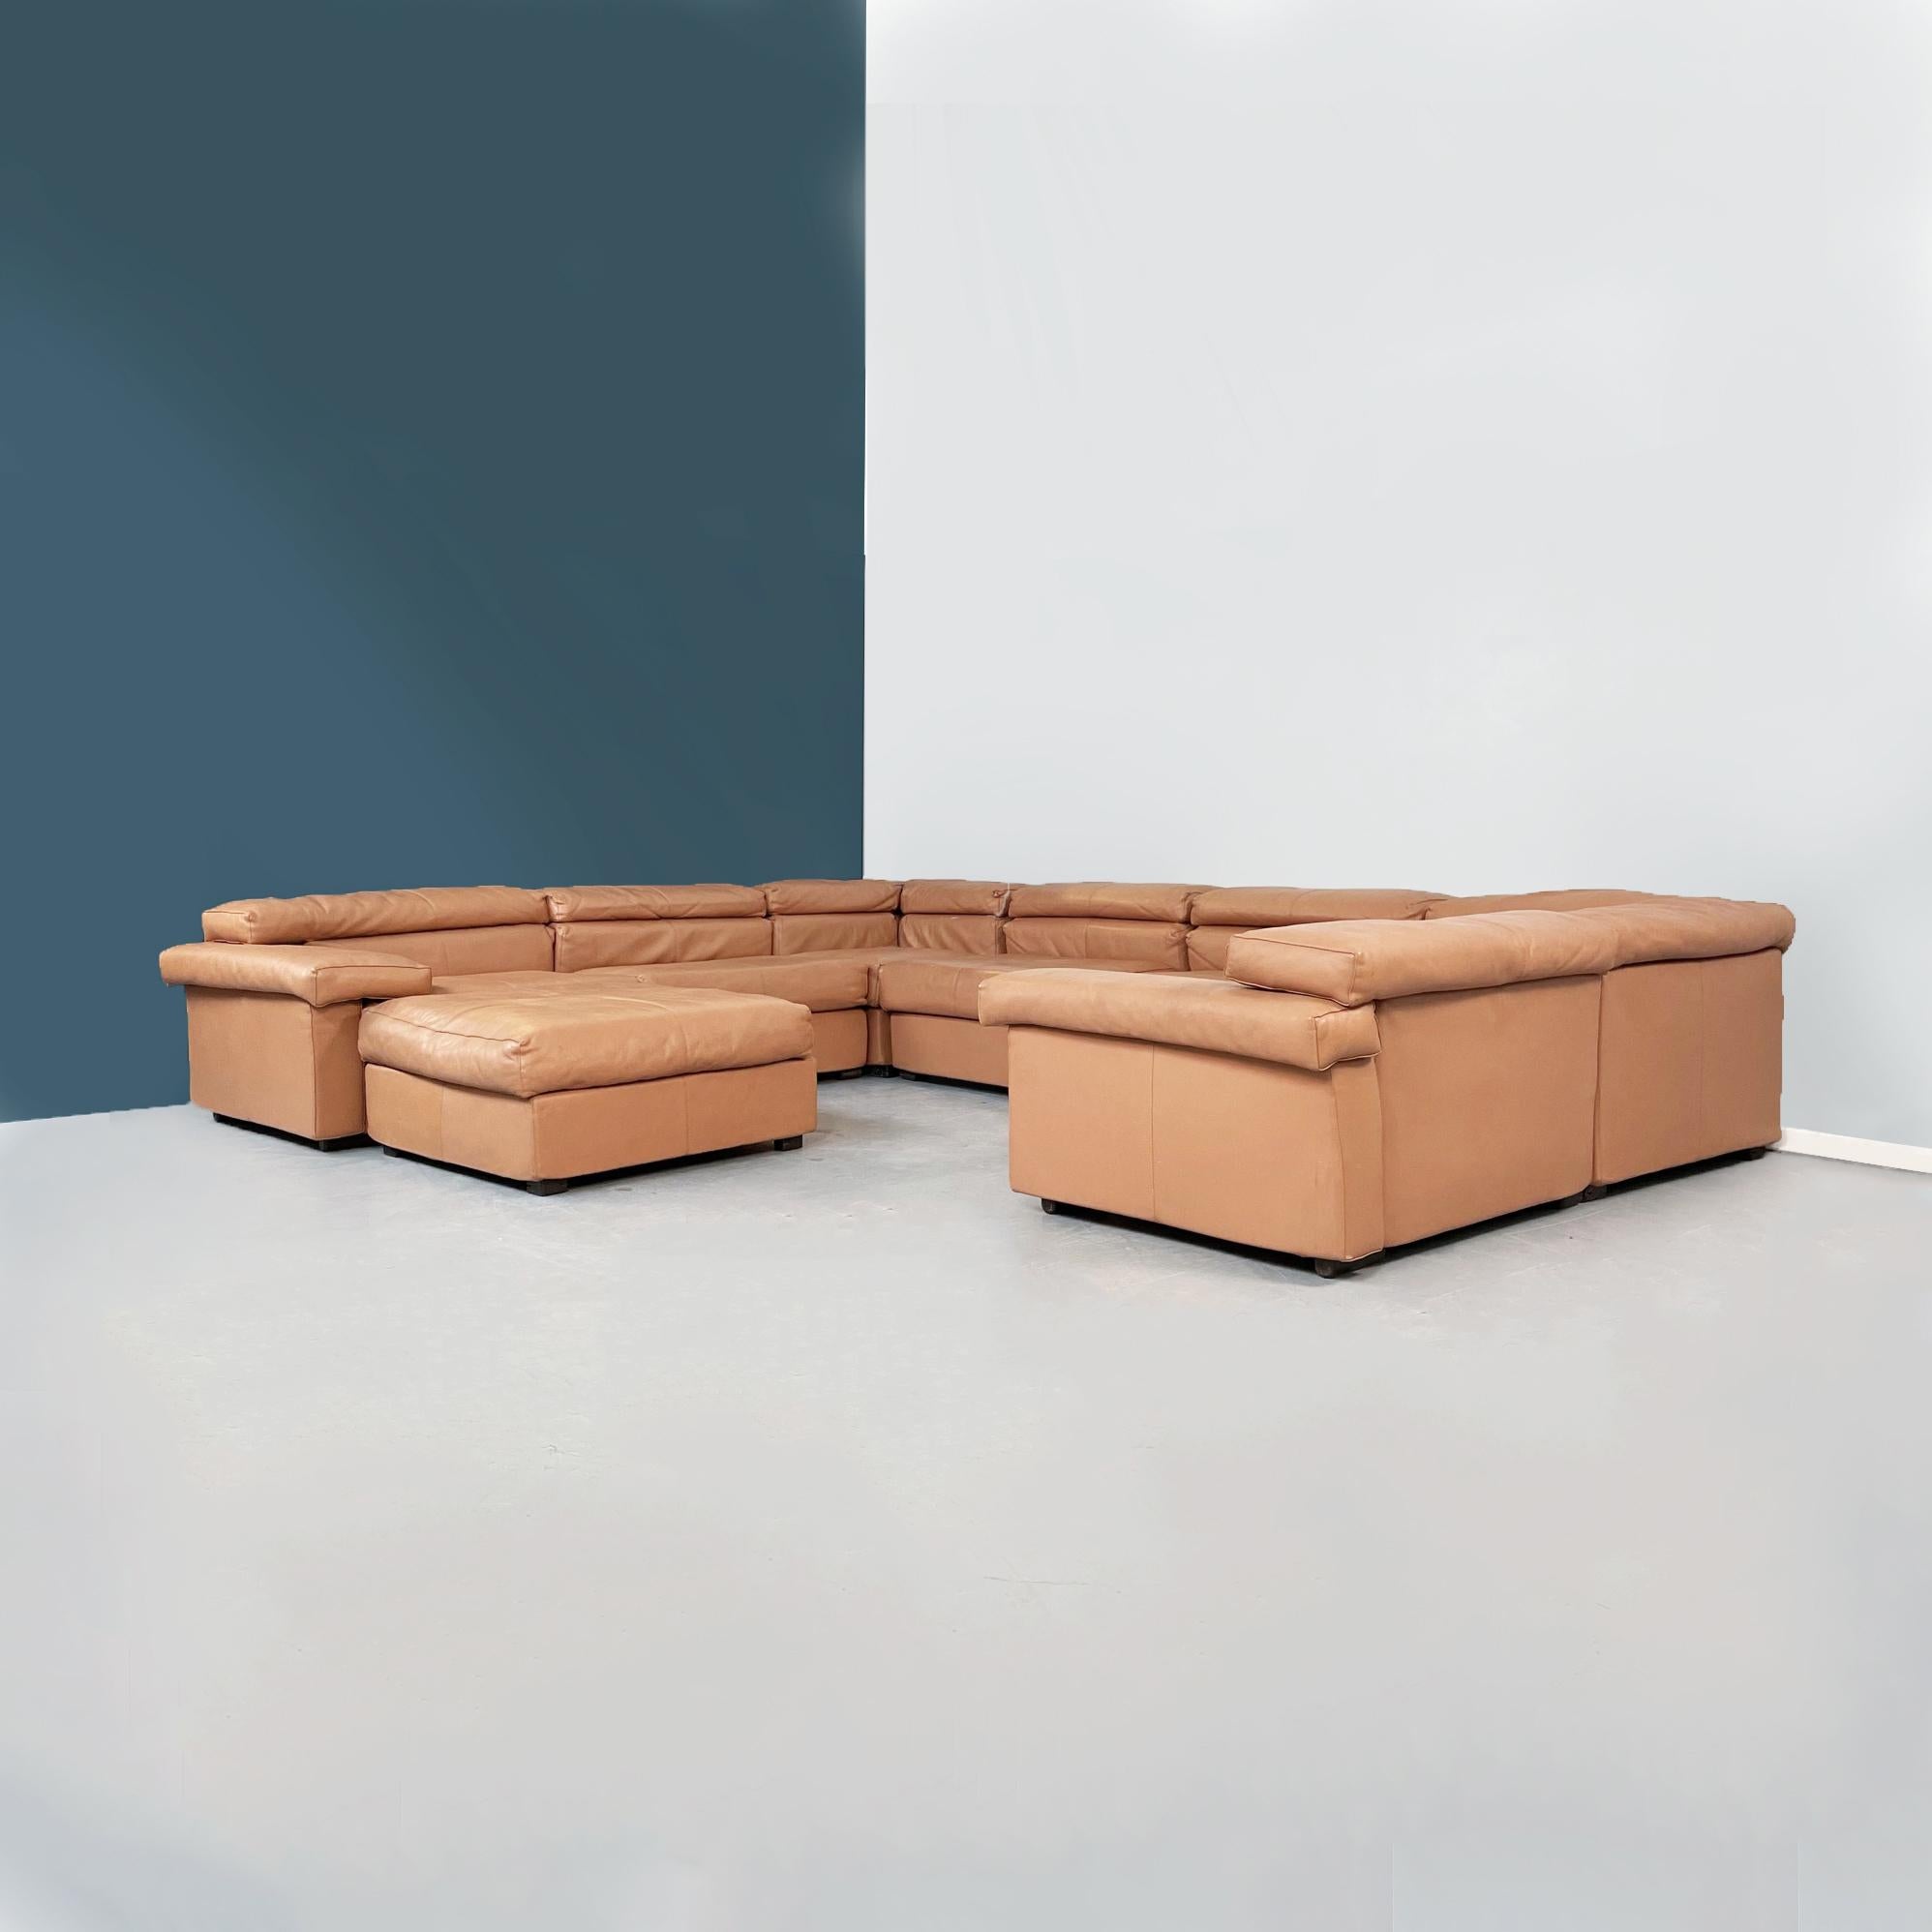 Italian mid-century Erasmo brown leather Sofa by Afra and Tobia Scarpa for B&B, 1980s.
Erasmo corner sofa in light brown leather. The modules that compose it are 3 central, 2 corners, two with armrests and a pouf. The modulars are interchangeabl.